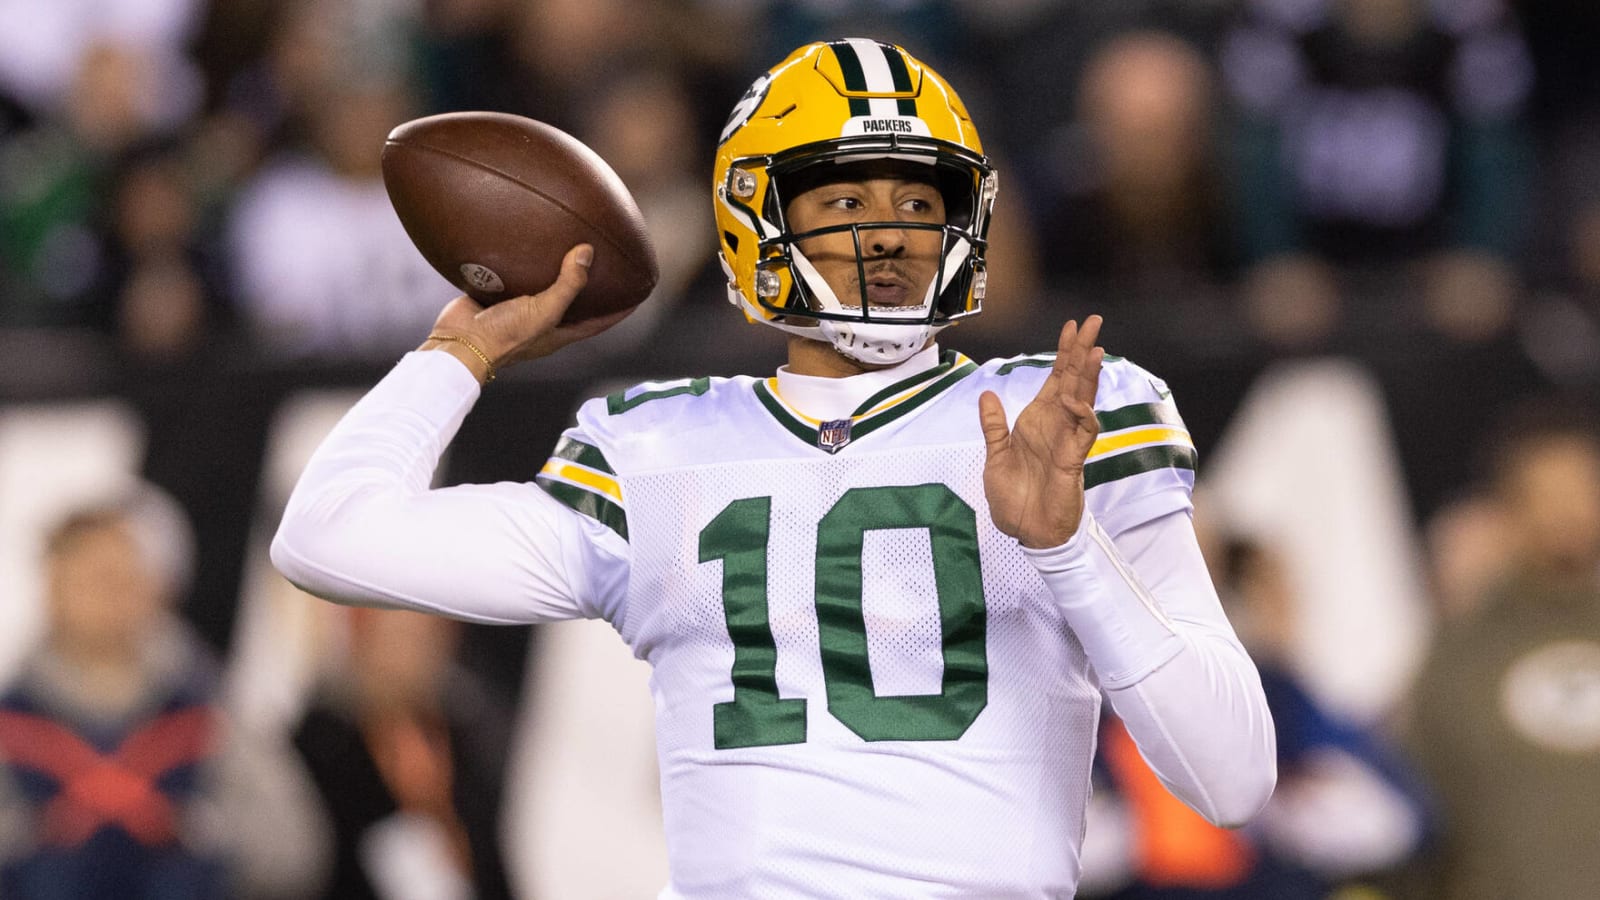 Former Packer signals he's uncertain about team's QB transition